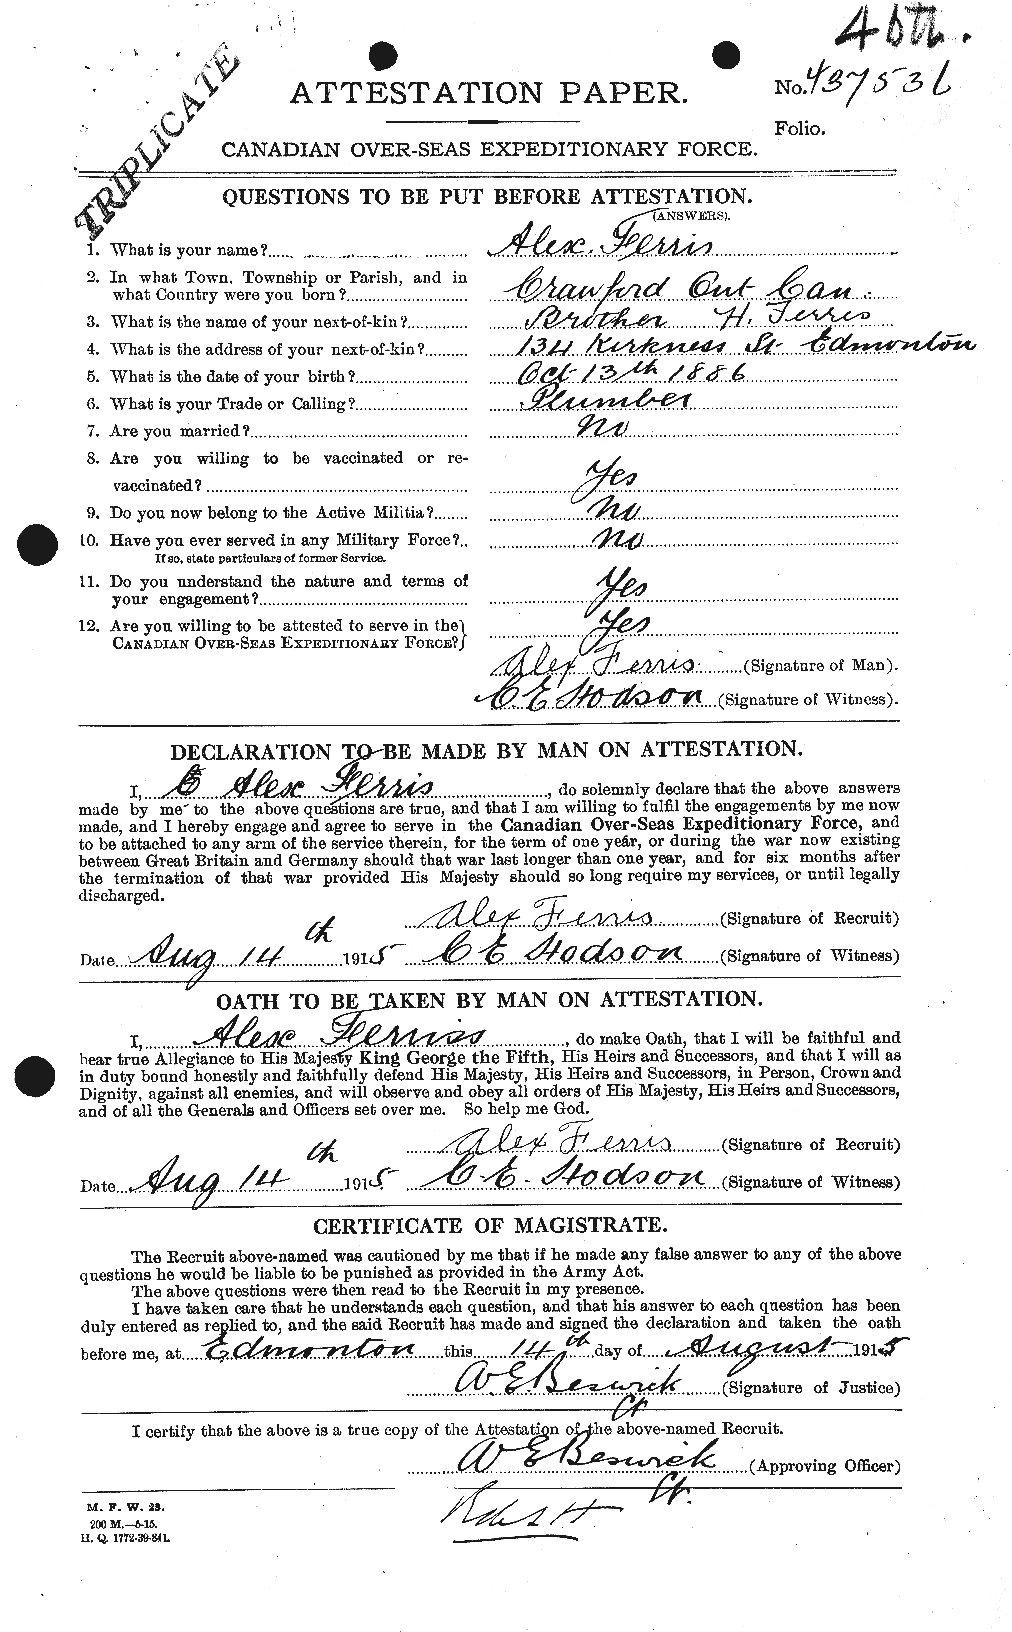 Personnel Records of the First World War - CEF 325144a